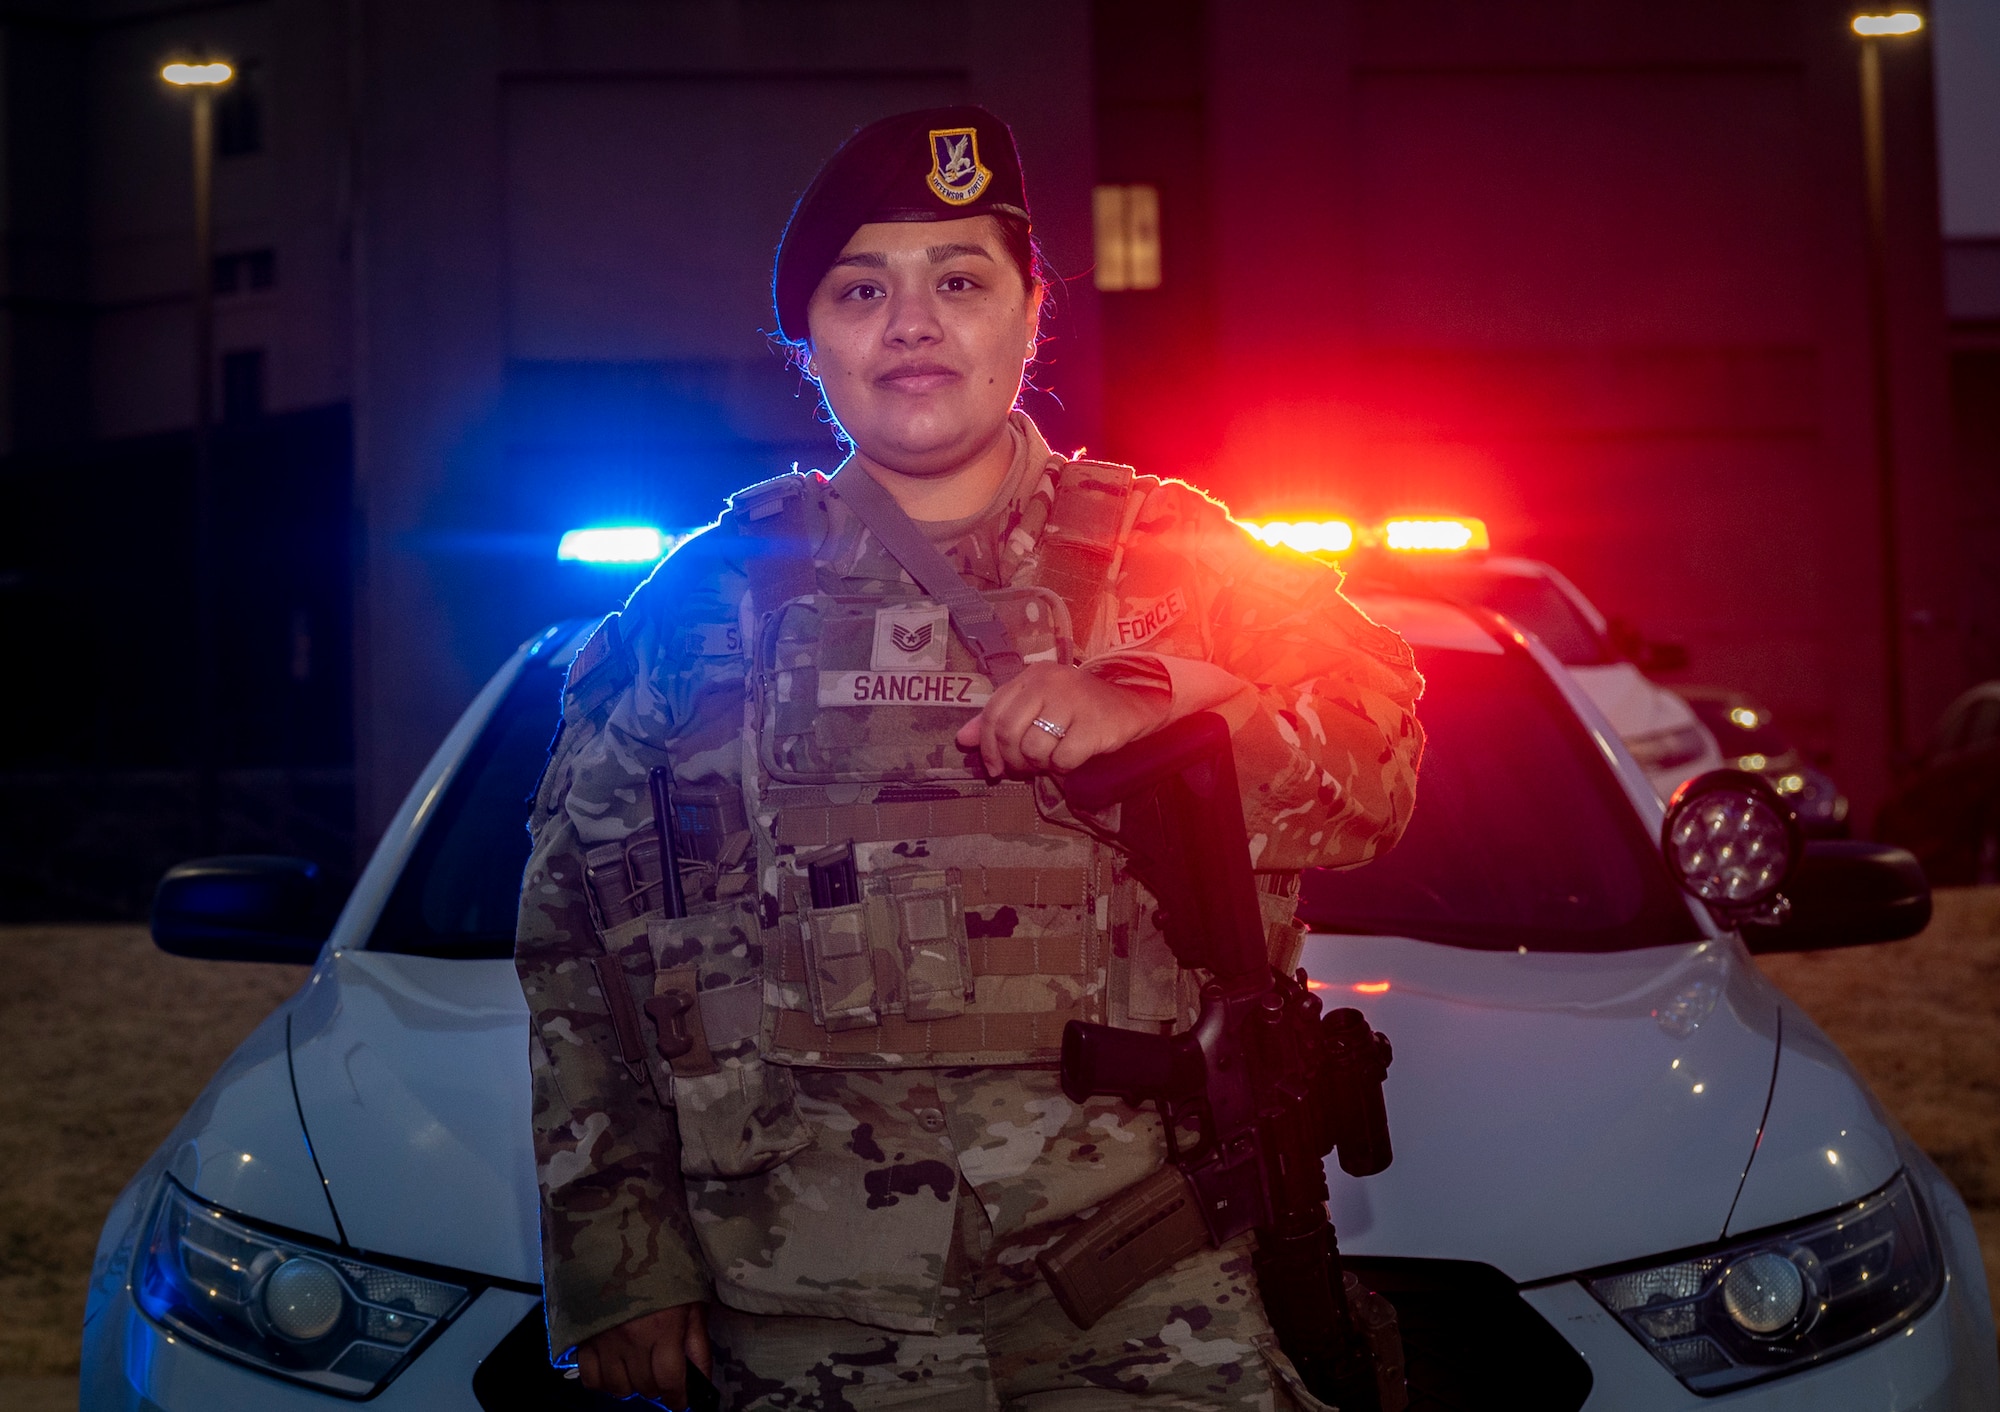 U.S. Air Force Tech. Sgt. Edith Sanchez, 51st Security Forces Squadron flight sergeant, poses for a photo in celebration of Women’s History Month at Osan Air Base, Republic of Korea, March 28, 2023.